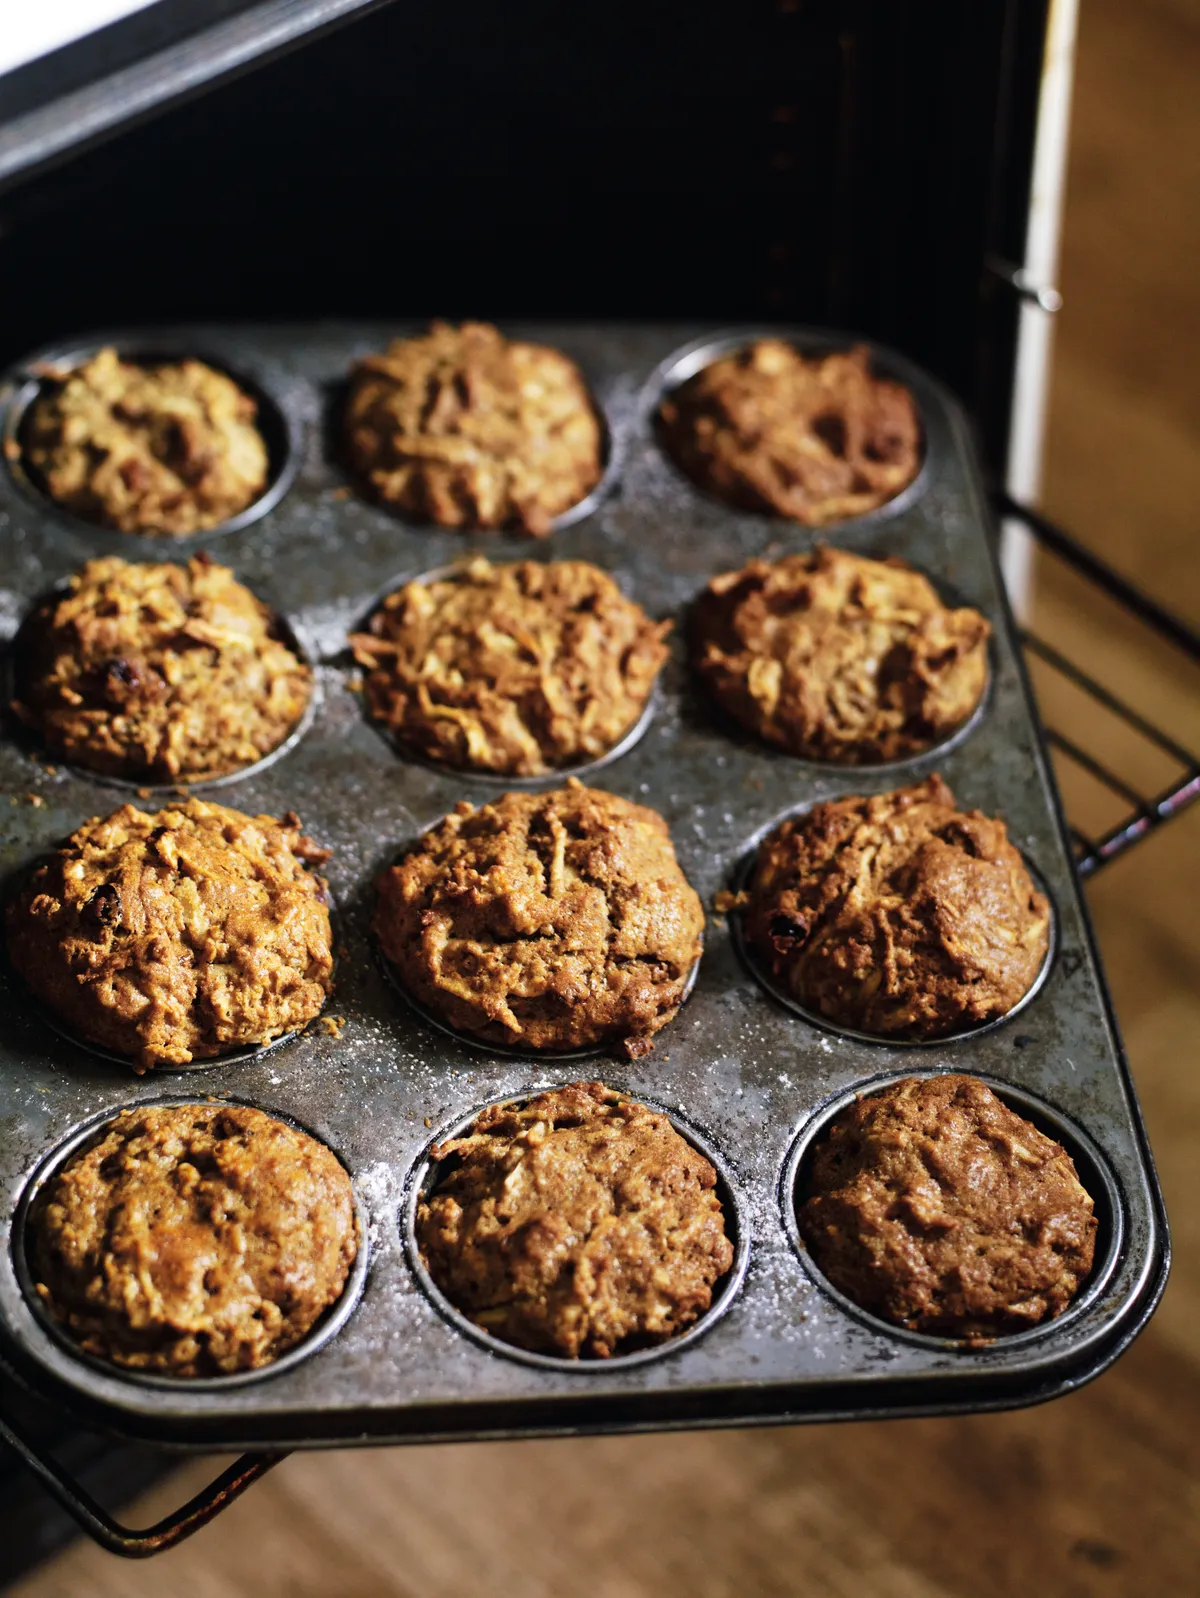 Parsnip and apple muffins